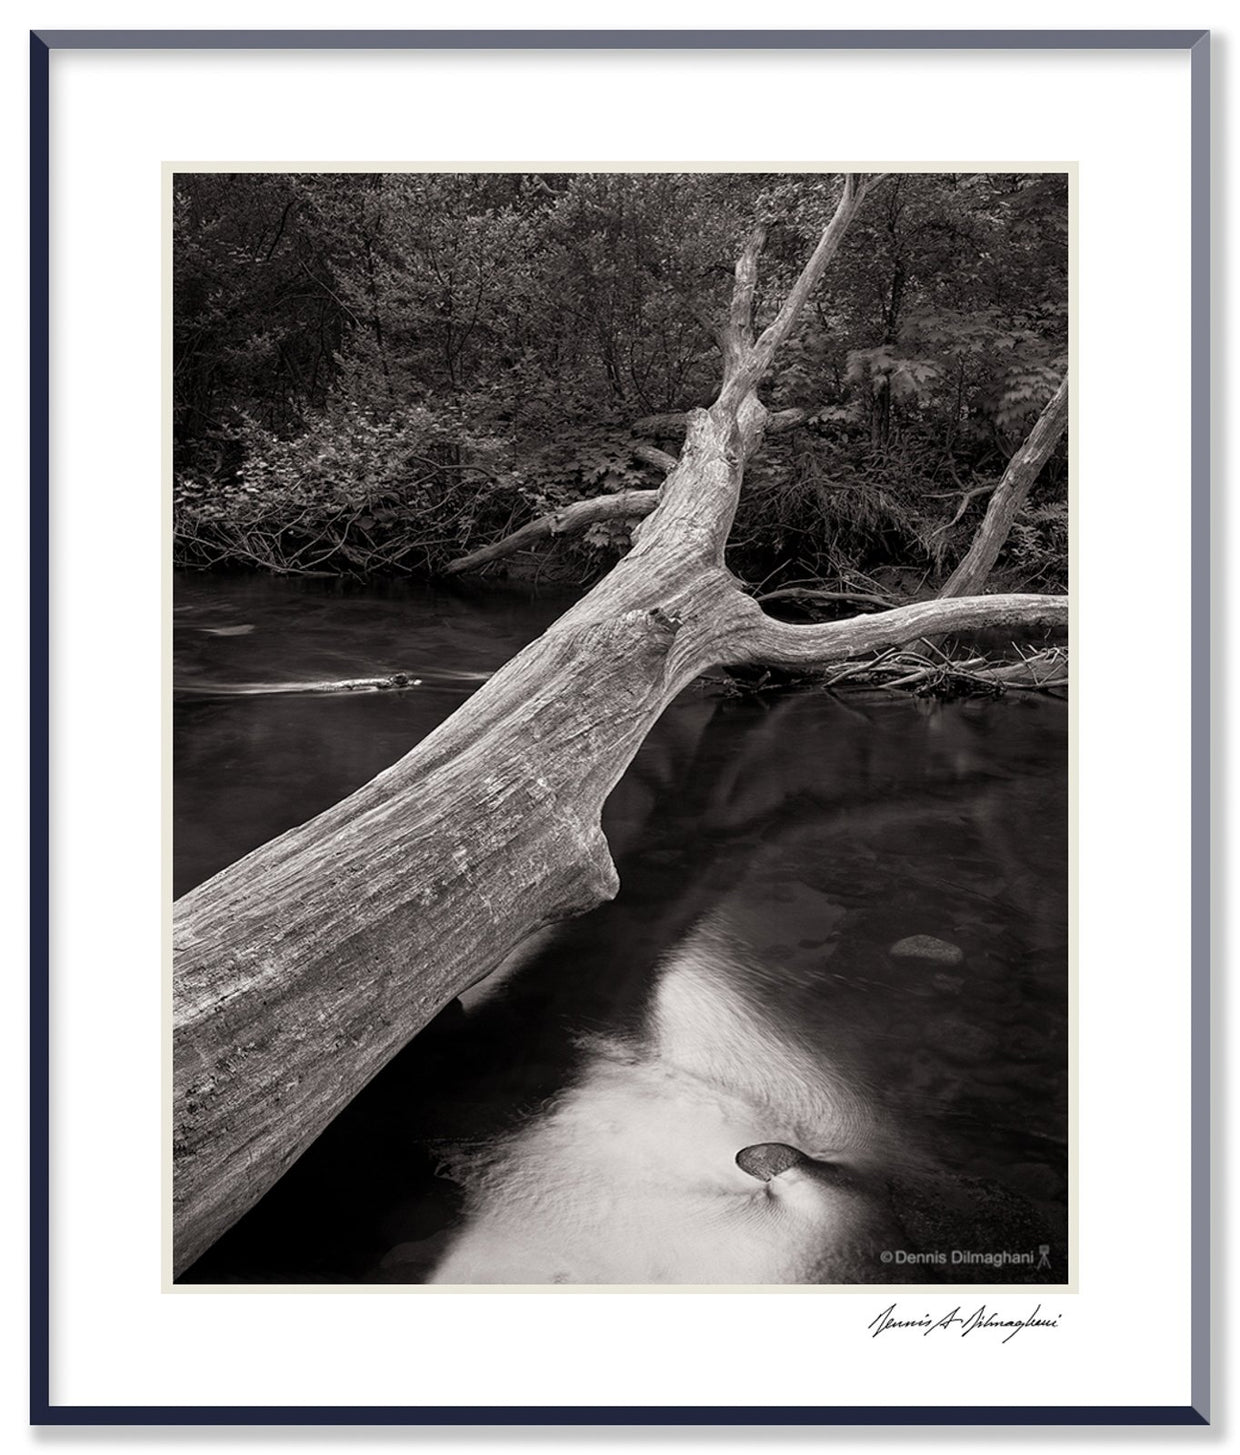 Dilmaghani Black and White Photograph, Fallen Tree over Stream, CA